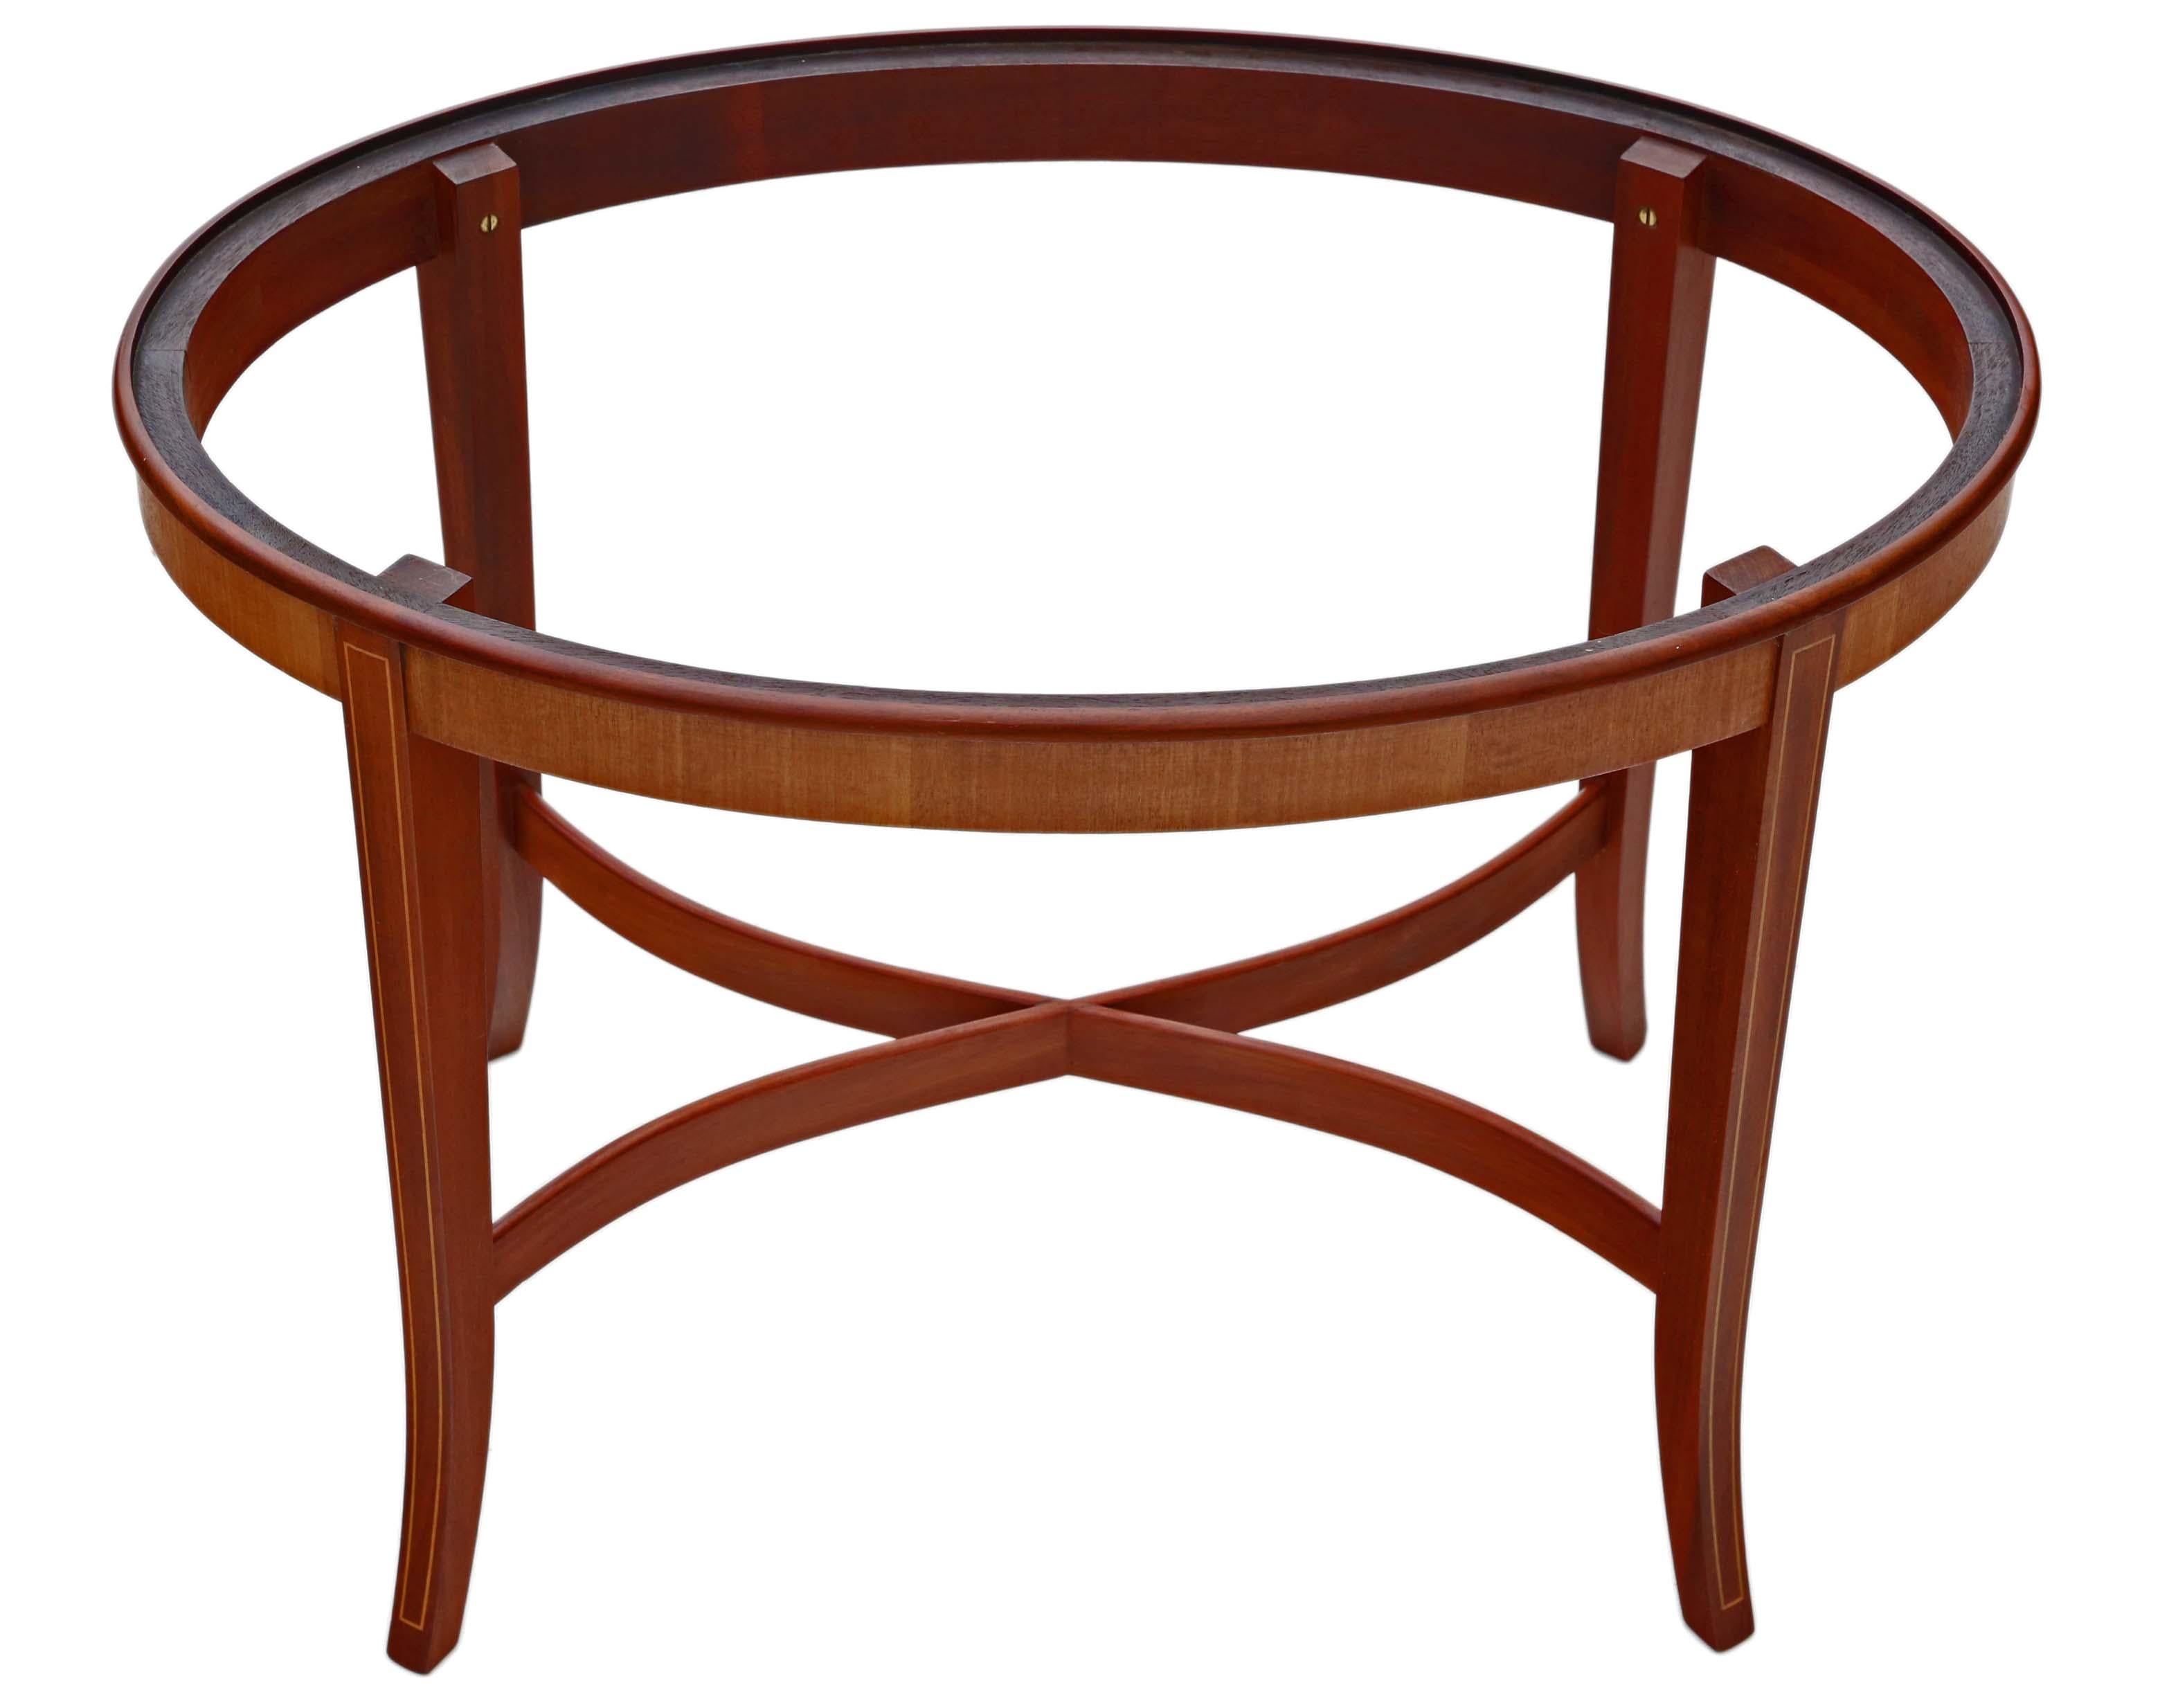 Early 20th Century Antique Edwardian Mahogany and Satin Walnut Tray on Stand Coffee Table